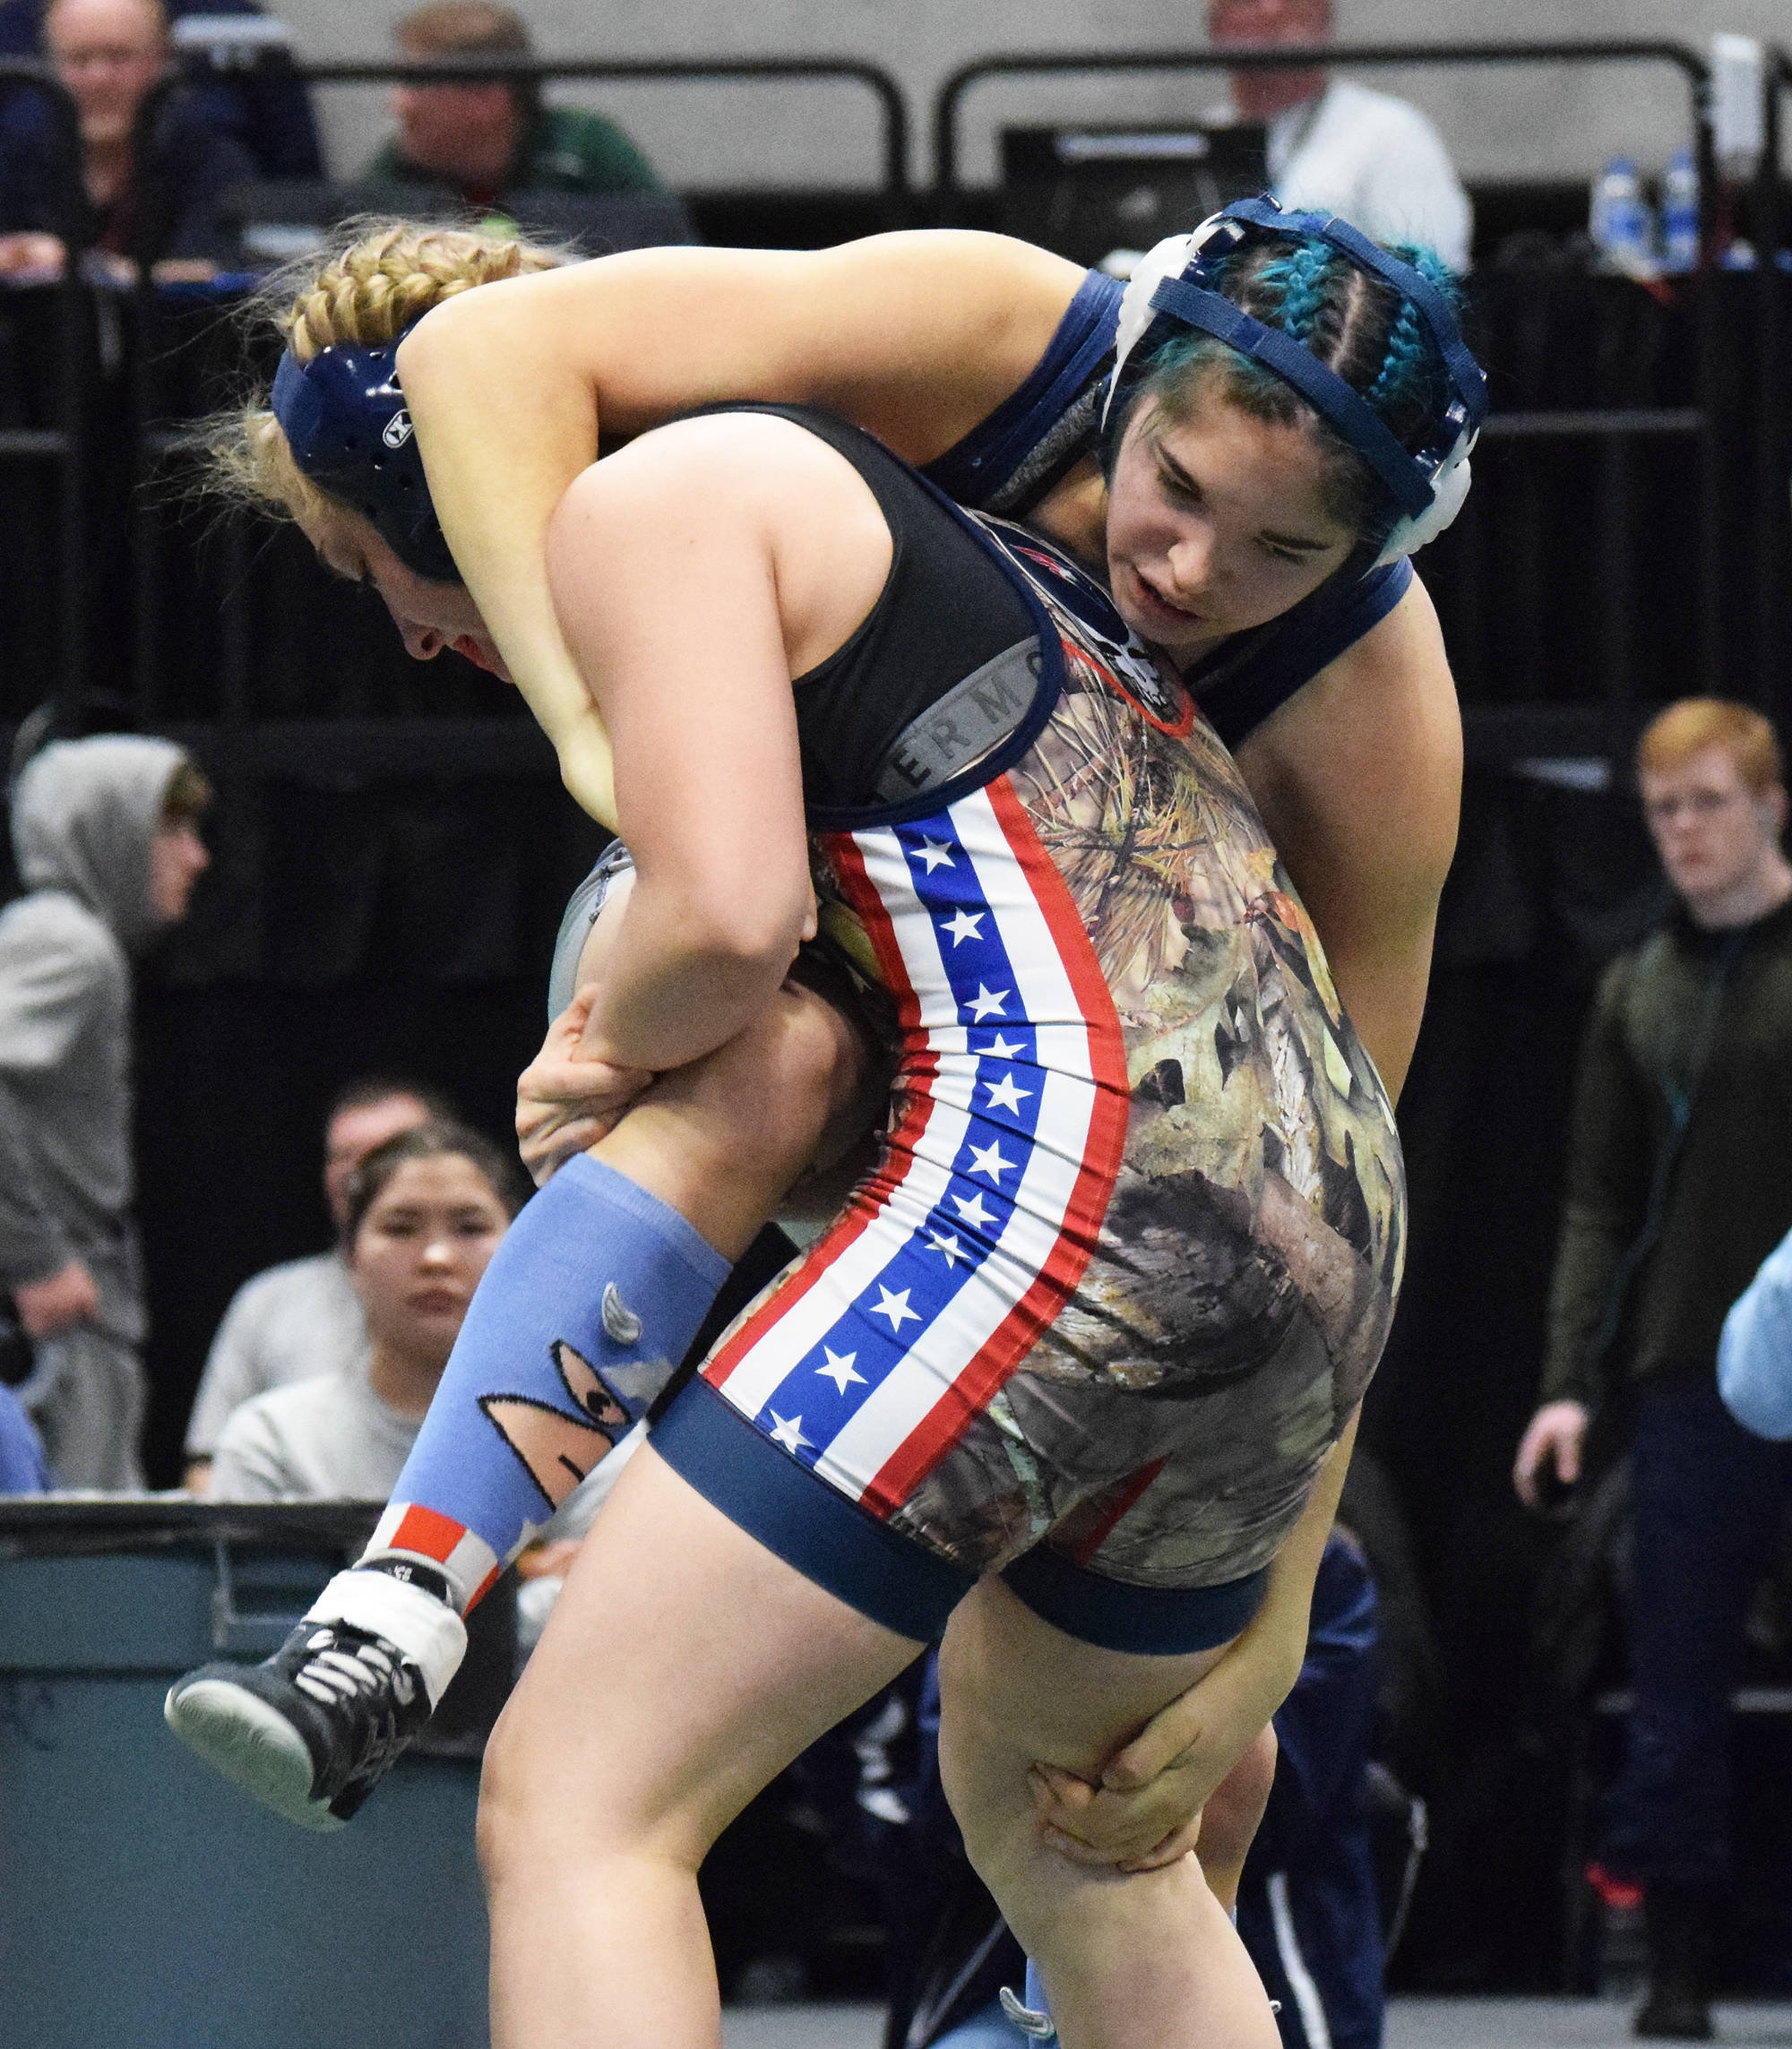 Soldotna’s Trinity Donovan wrestles Emily Bellant of North Pole in the girls 145-pound final Saturday, Dec. 21, 2019, at the ASAA State Wrestling Championships at the Alaska Airlines Center in Anchorage, Alaska. (Photo by Joey Klecka/Peninsula Clarion)